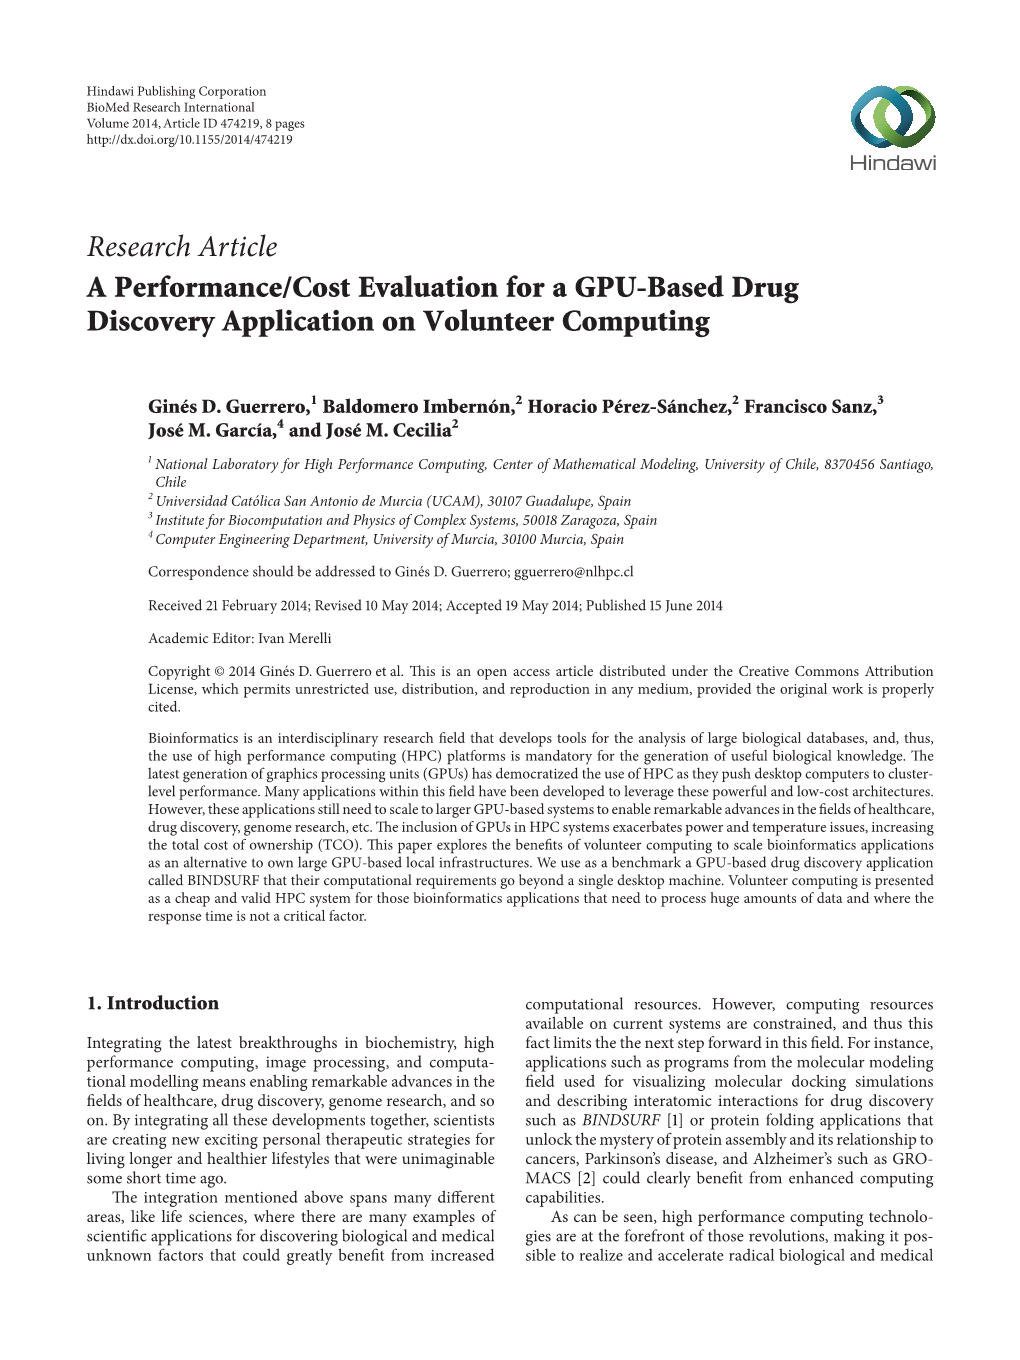 A Performance/Cost Evaluation for a GPU-Based Drug Discovery Application on Volunteer Computing